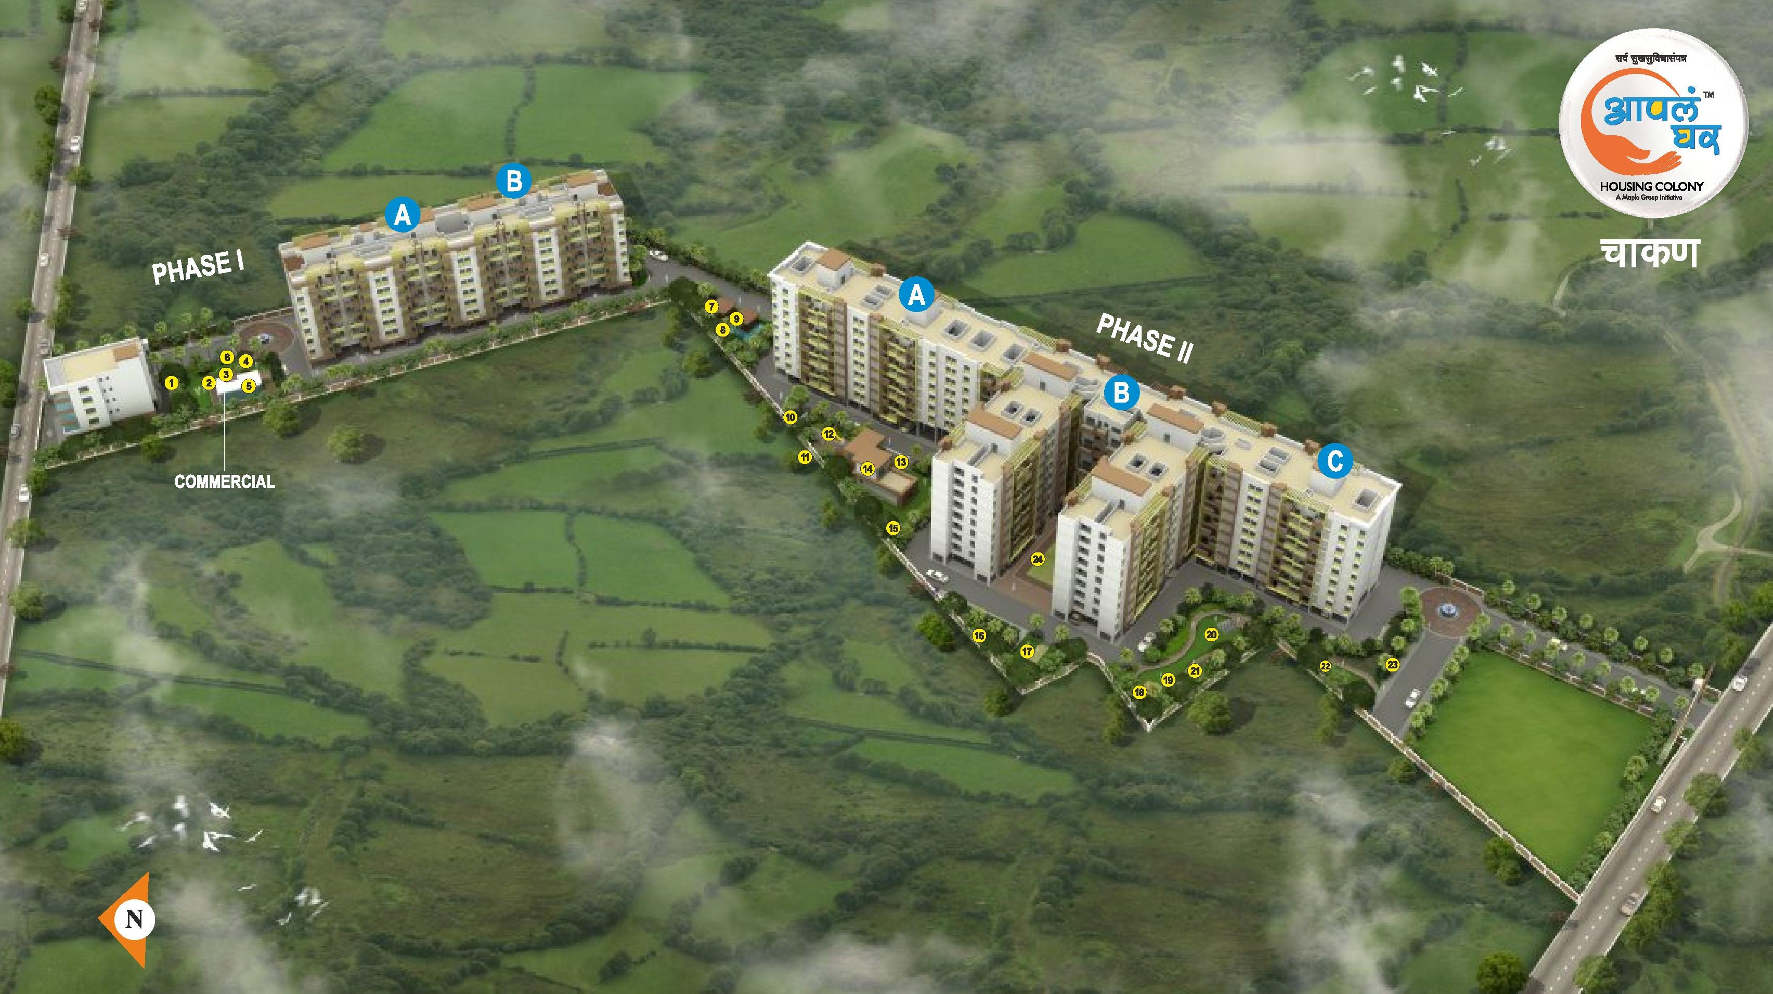 Maple Group, AAPLA GHAR CHAKAN, 1&2BHK FLATS IN PUNE, HOUSE FOR SALE IN PUNE, READY POSSESSION FLATS IN PUNE, TOP PROJECTS IN PUNE.